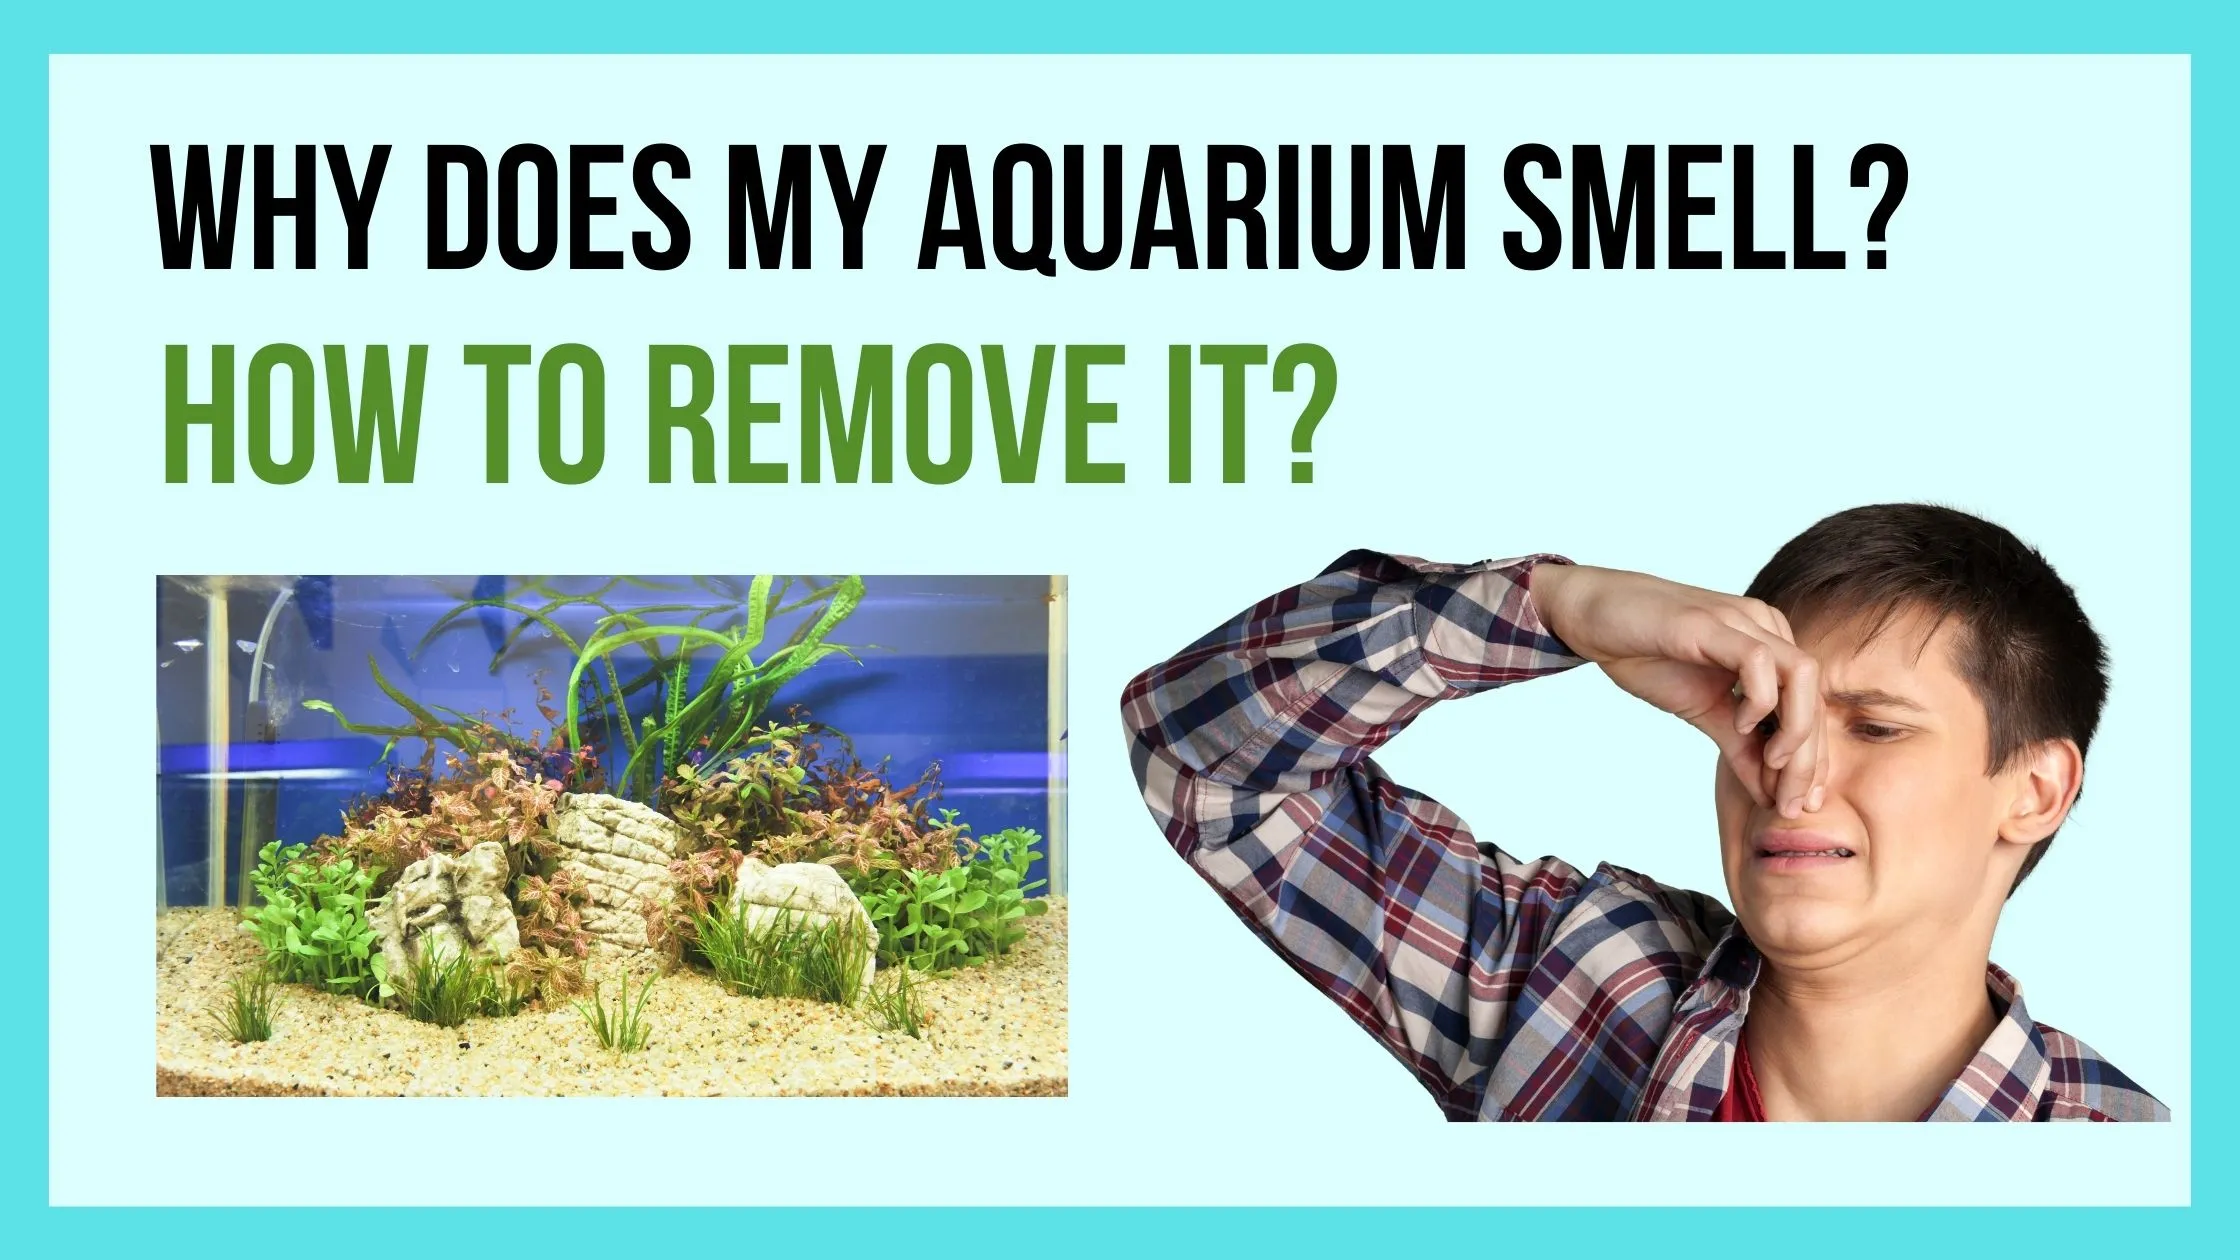 Why Does my Aquarium Smell